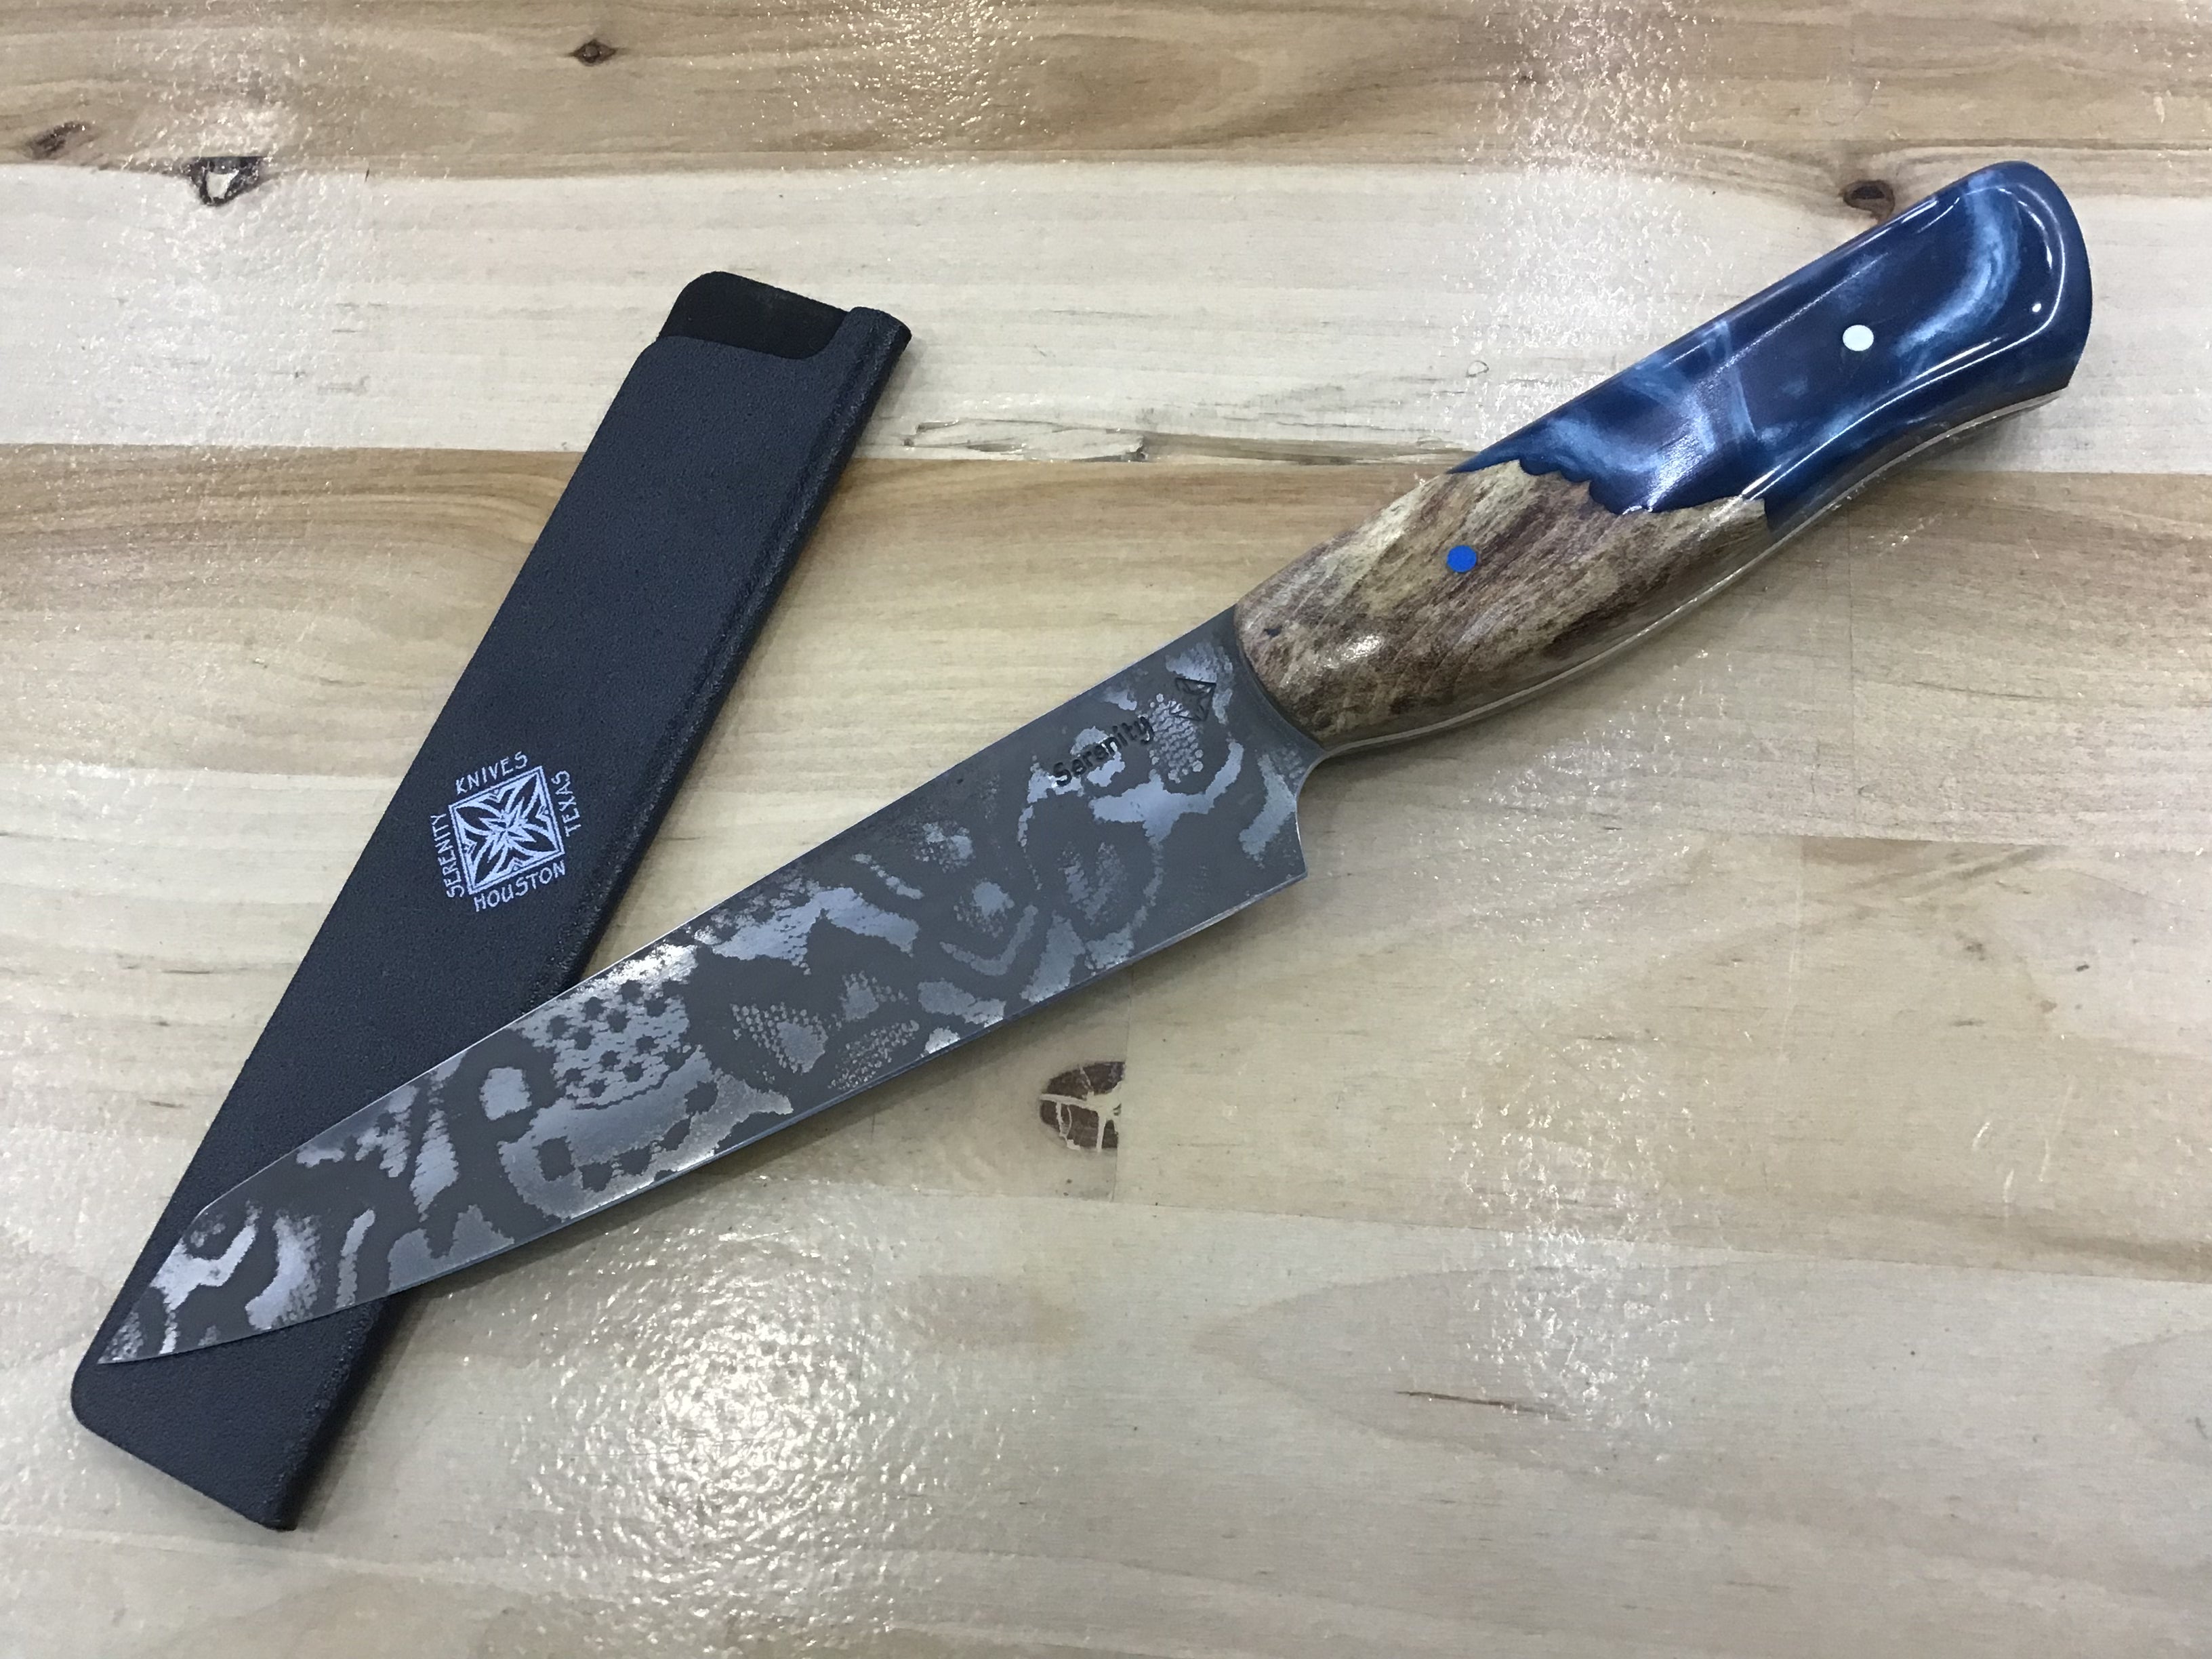 Lace Etched Petty - K-Tip CPM154 with AAO Maple Burl & Blue/Silver Resin Hybrid